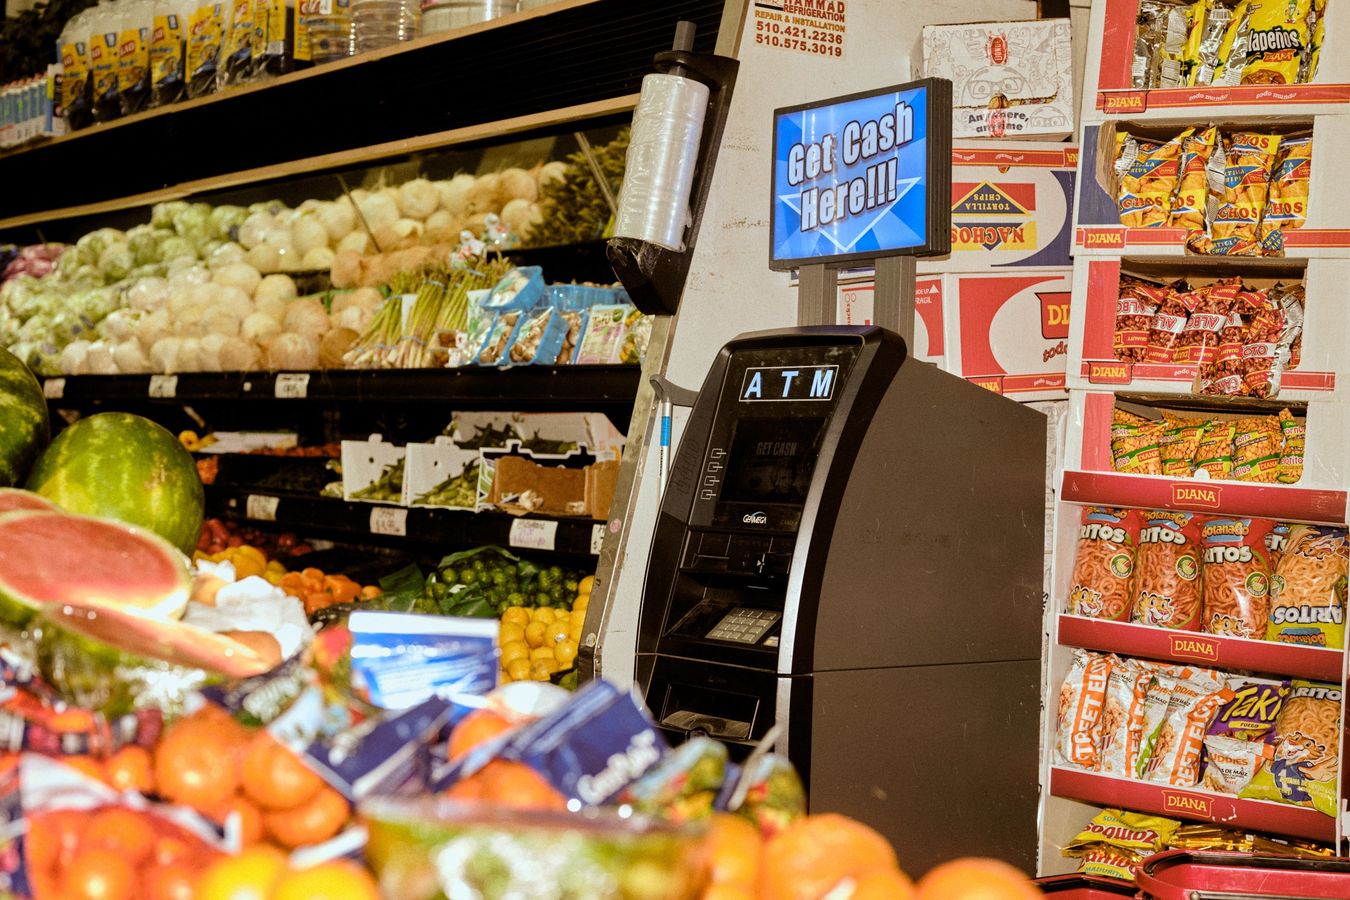 Owner of the grocery store where an ATM machine was stolen. (Photo: The Wall Street Journal)